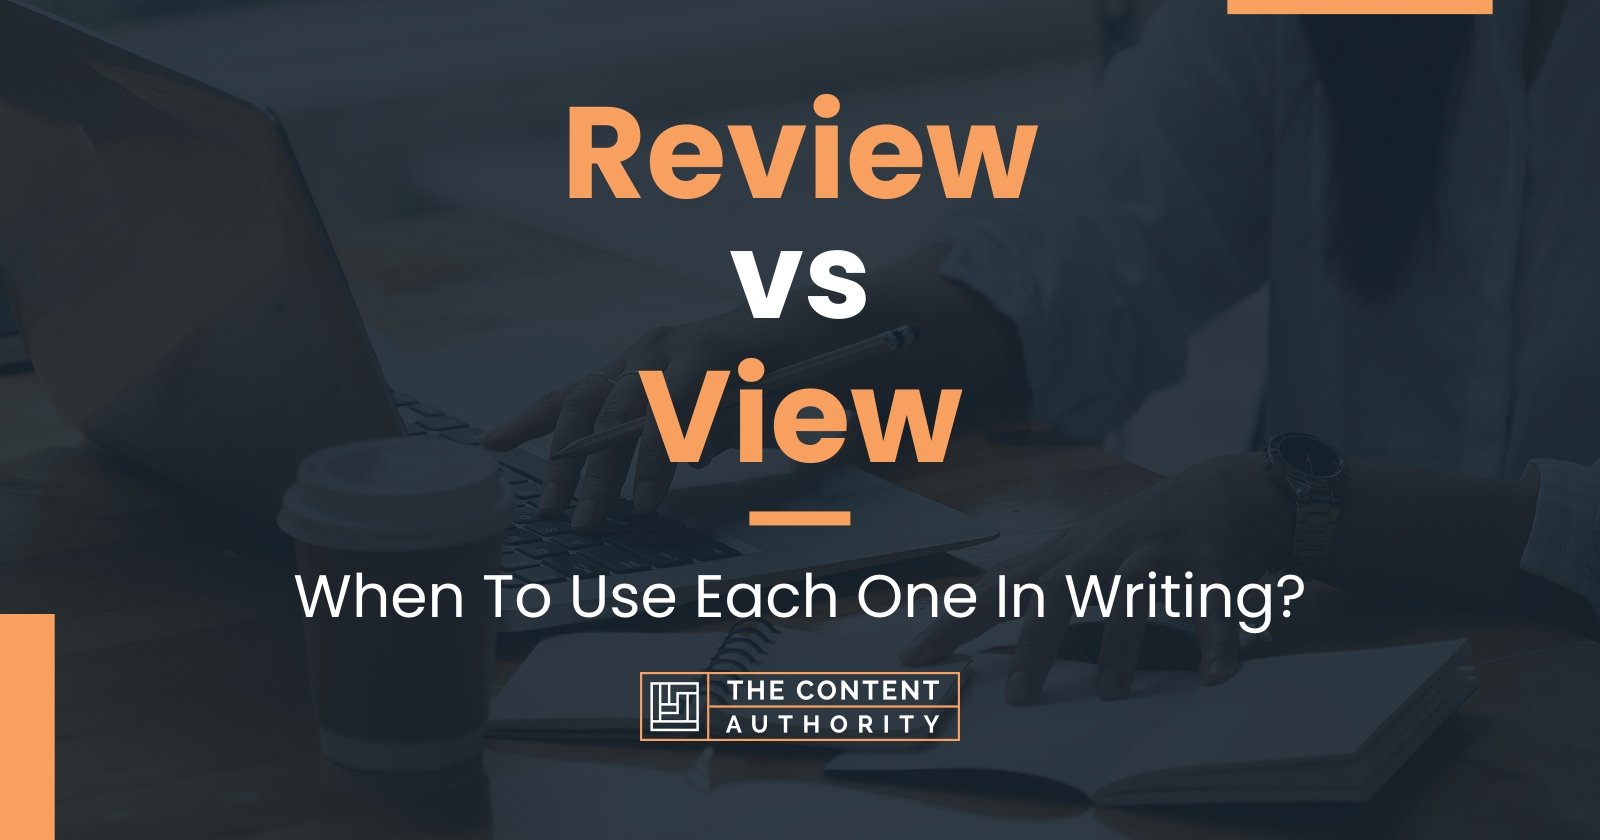 Review vs View: When To Use Each One In Writing?